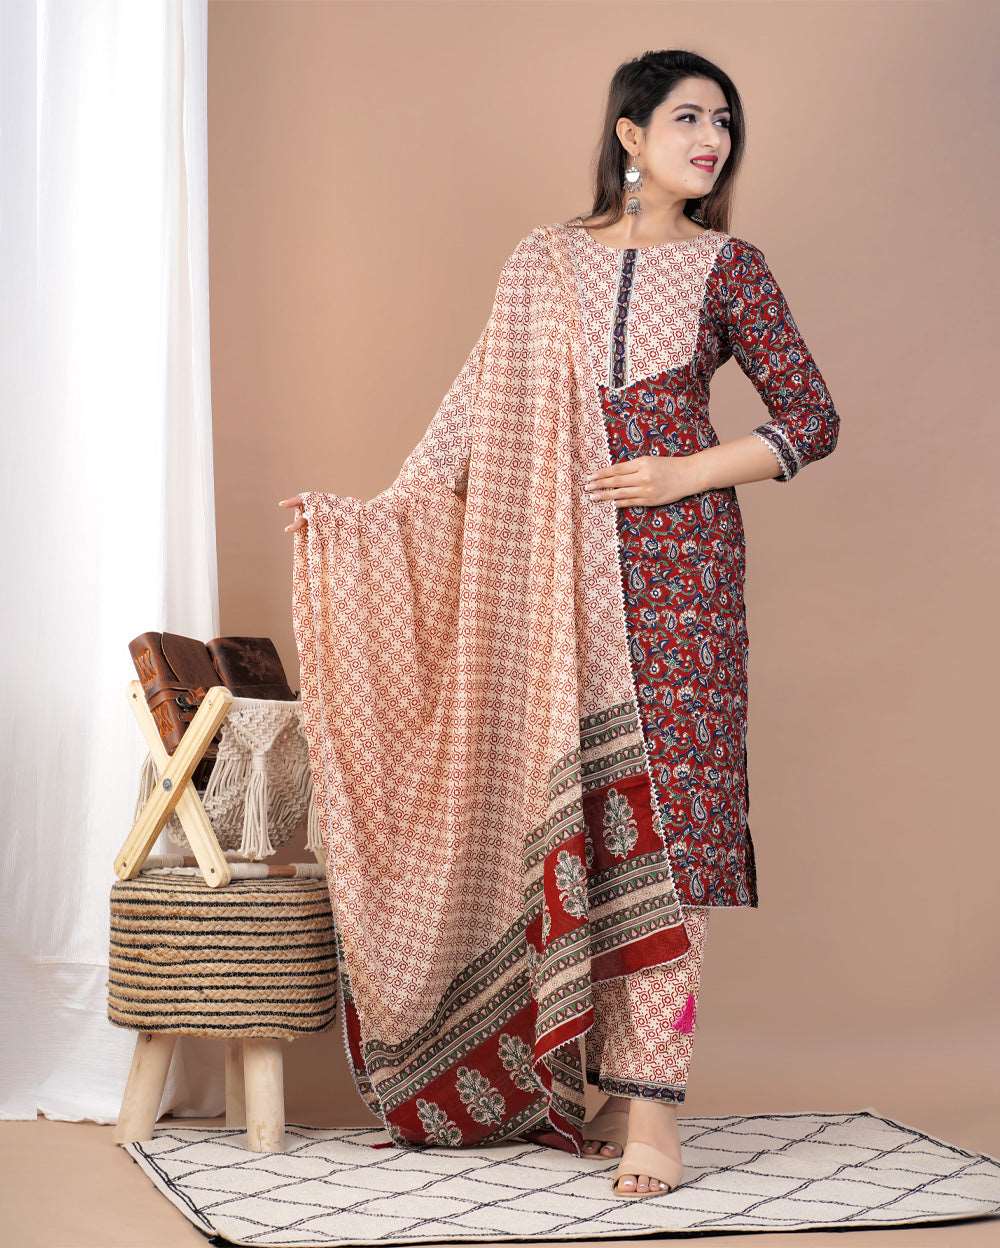 Red Jaal Printed Cotton Suit Set With Gota Work On Neck and Dupatta